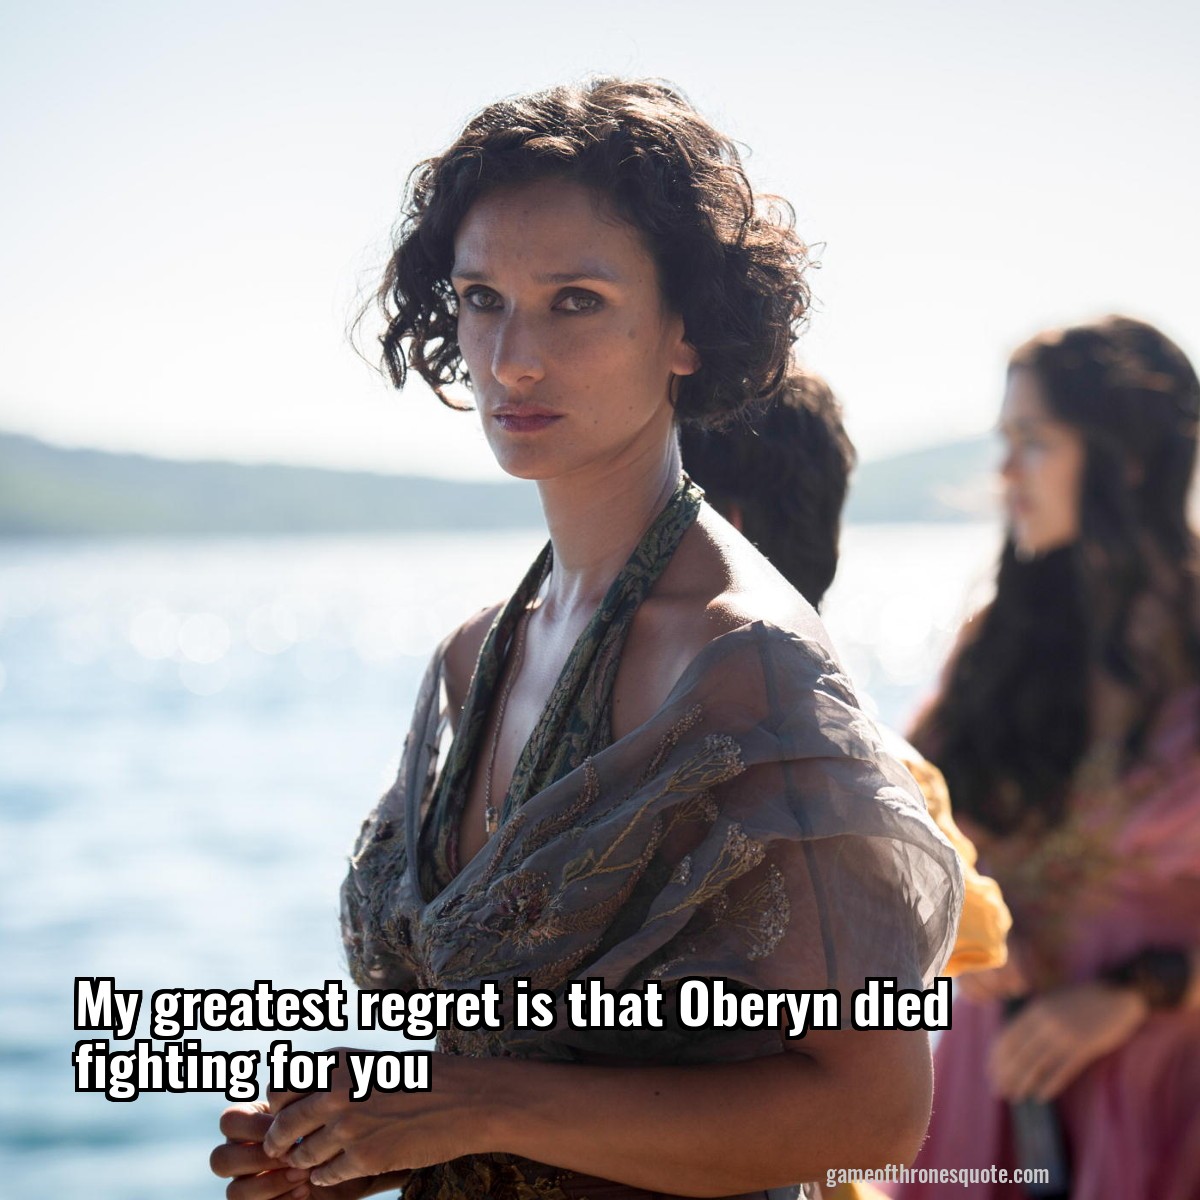 My greatest regret is that Oberyn died fighting for you